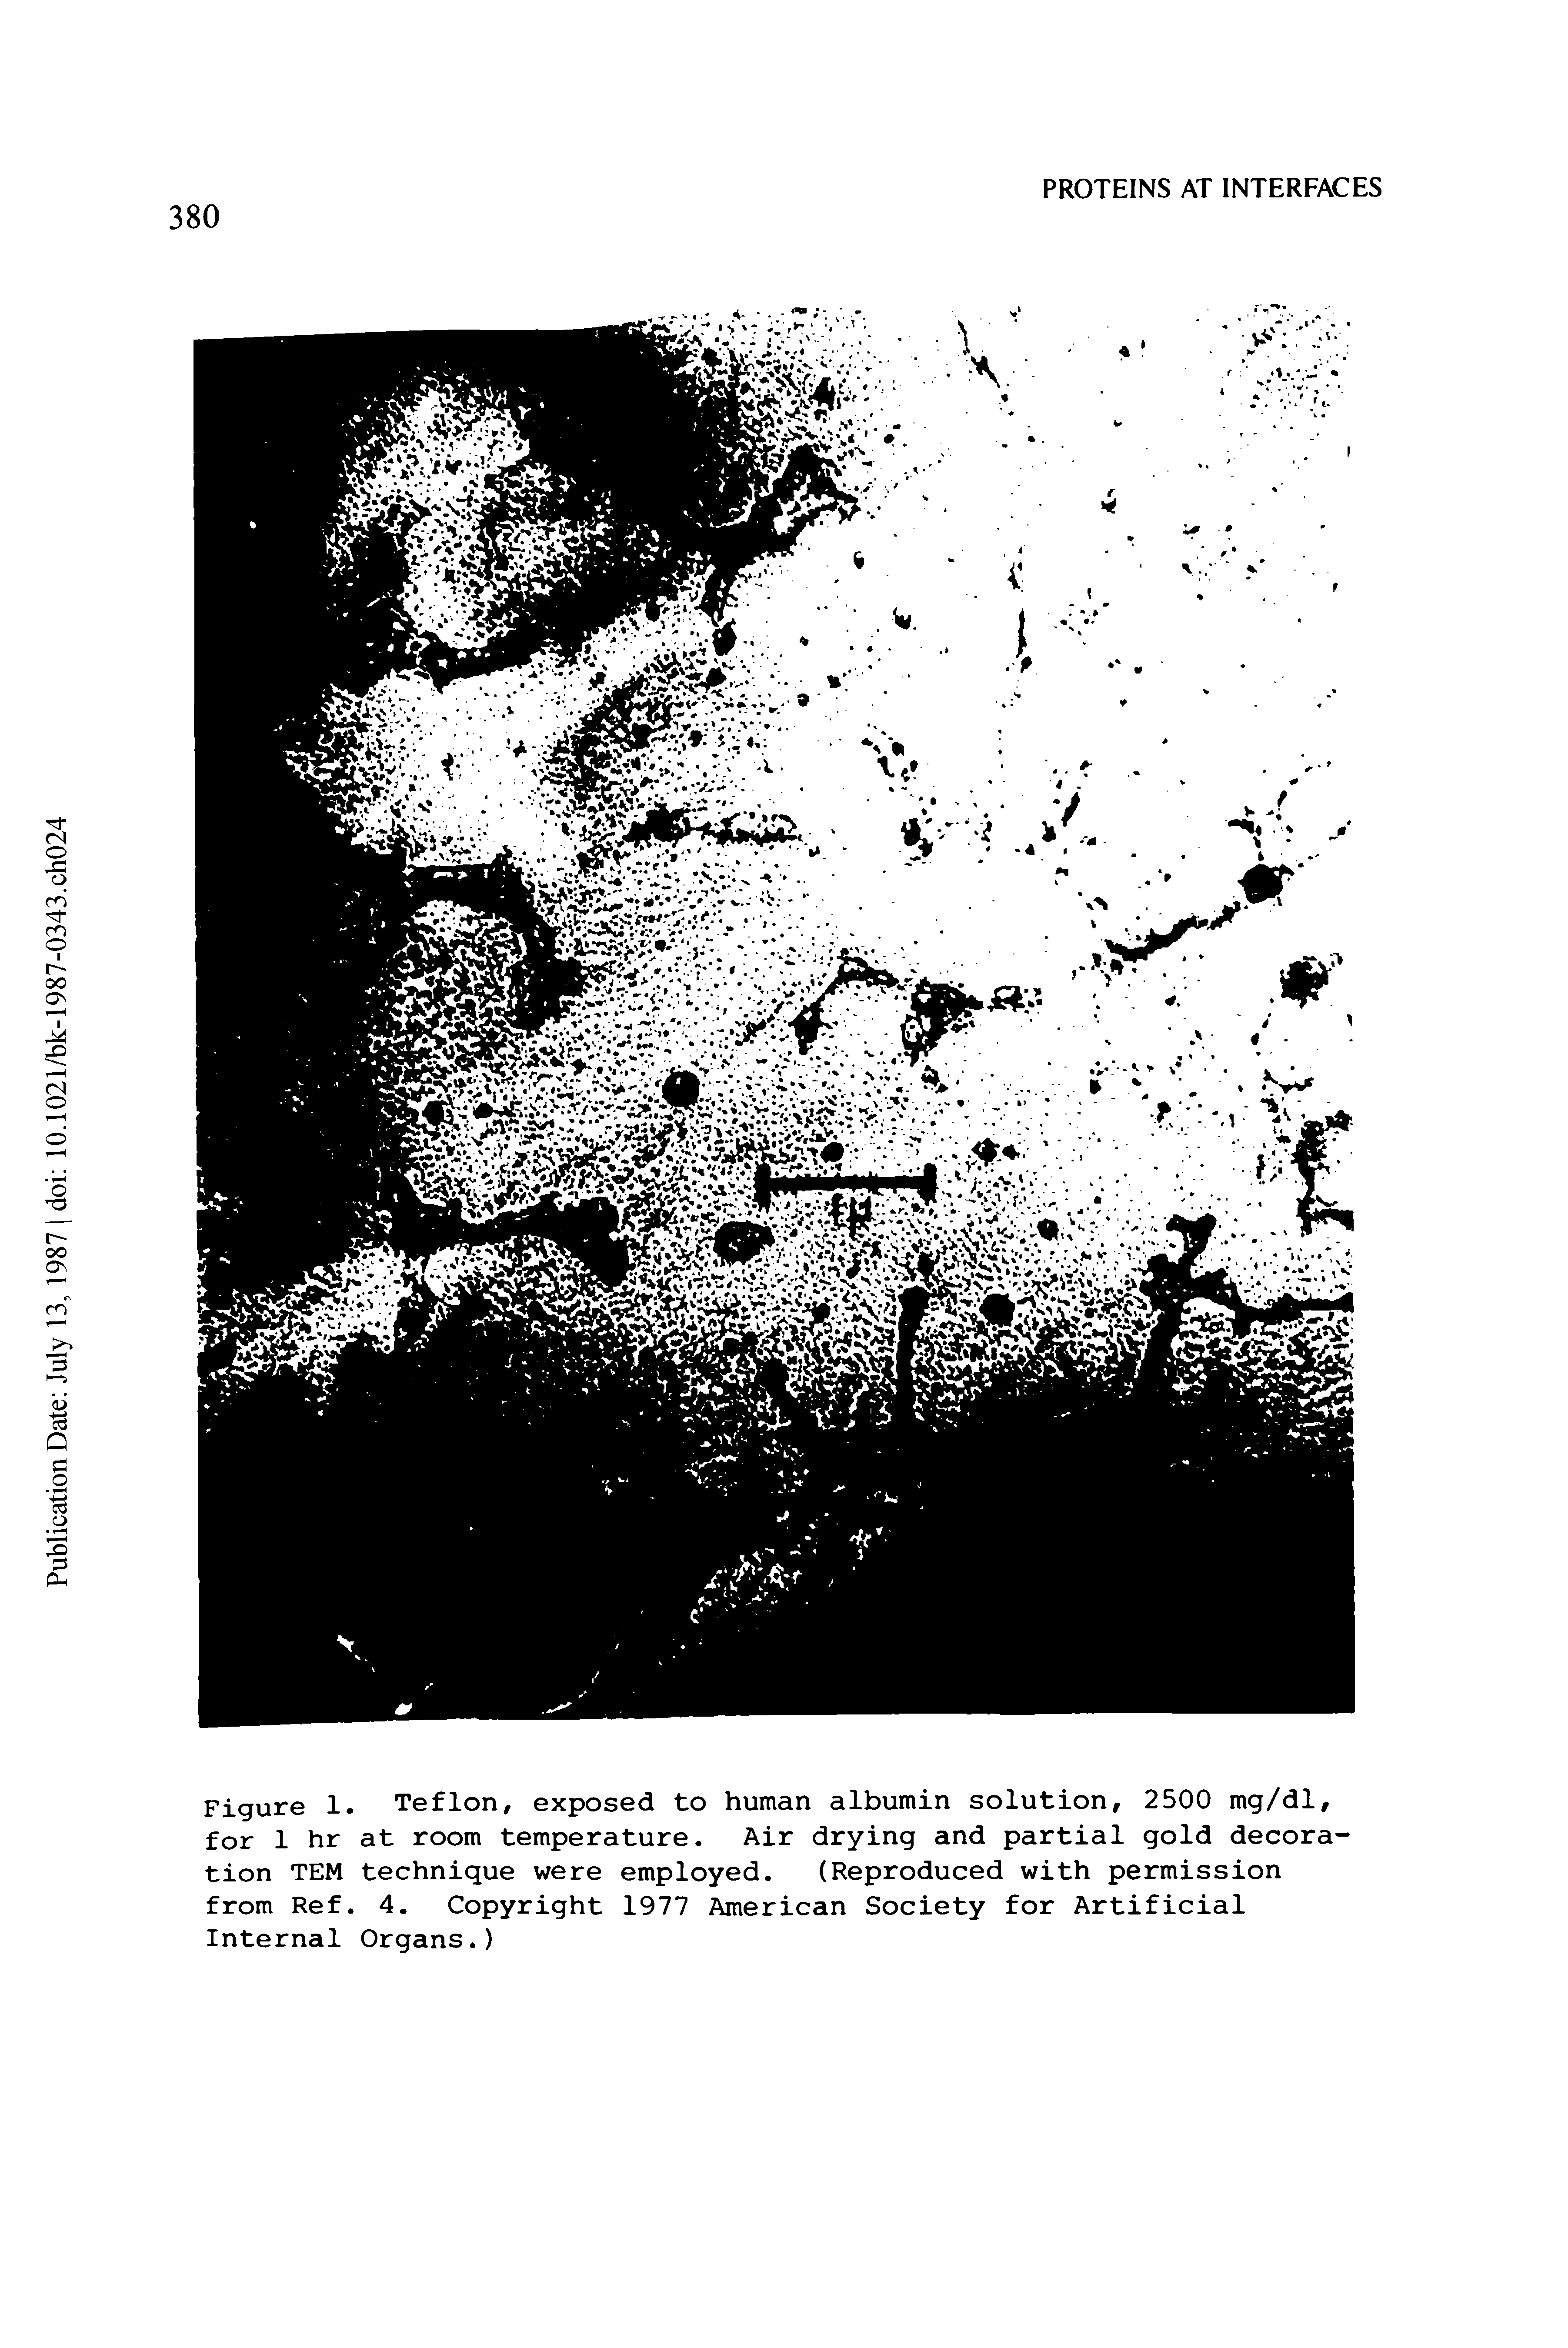 Figure 1. Teflon, exposed to human albumin solution, 2500 mg/dl, for 1 hr at room temperature. Air drying and partial gold decoration TEM technique were employed. (Reproduced with permission from Ref. 4. Copyright 1977 American Society for Artificial Internal Organs.)...